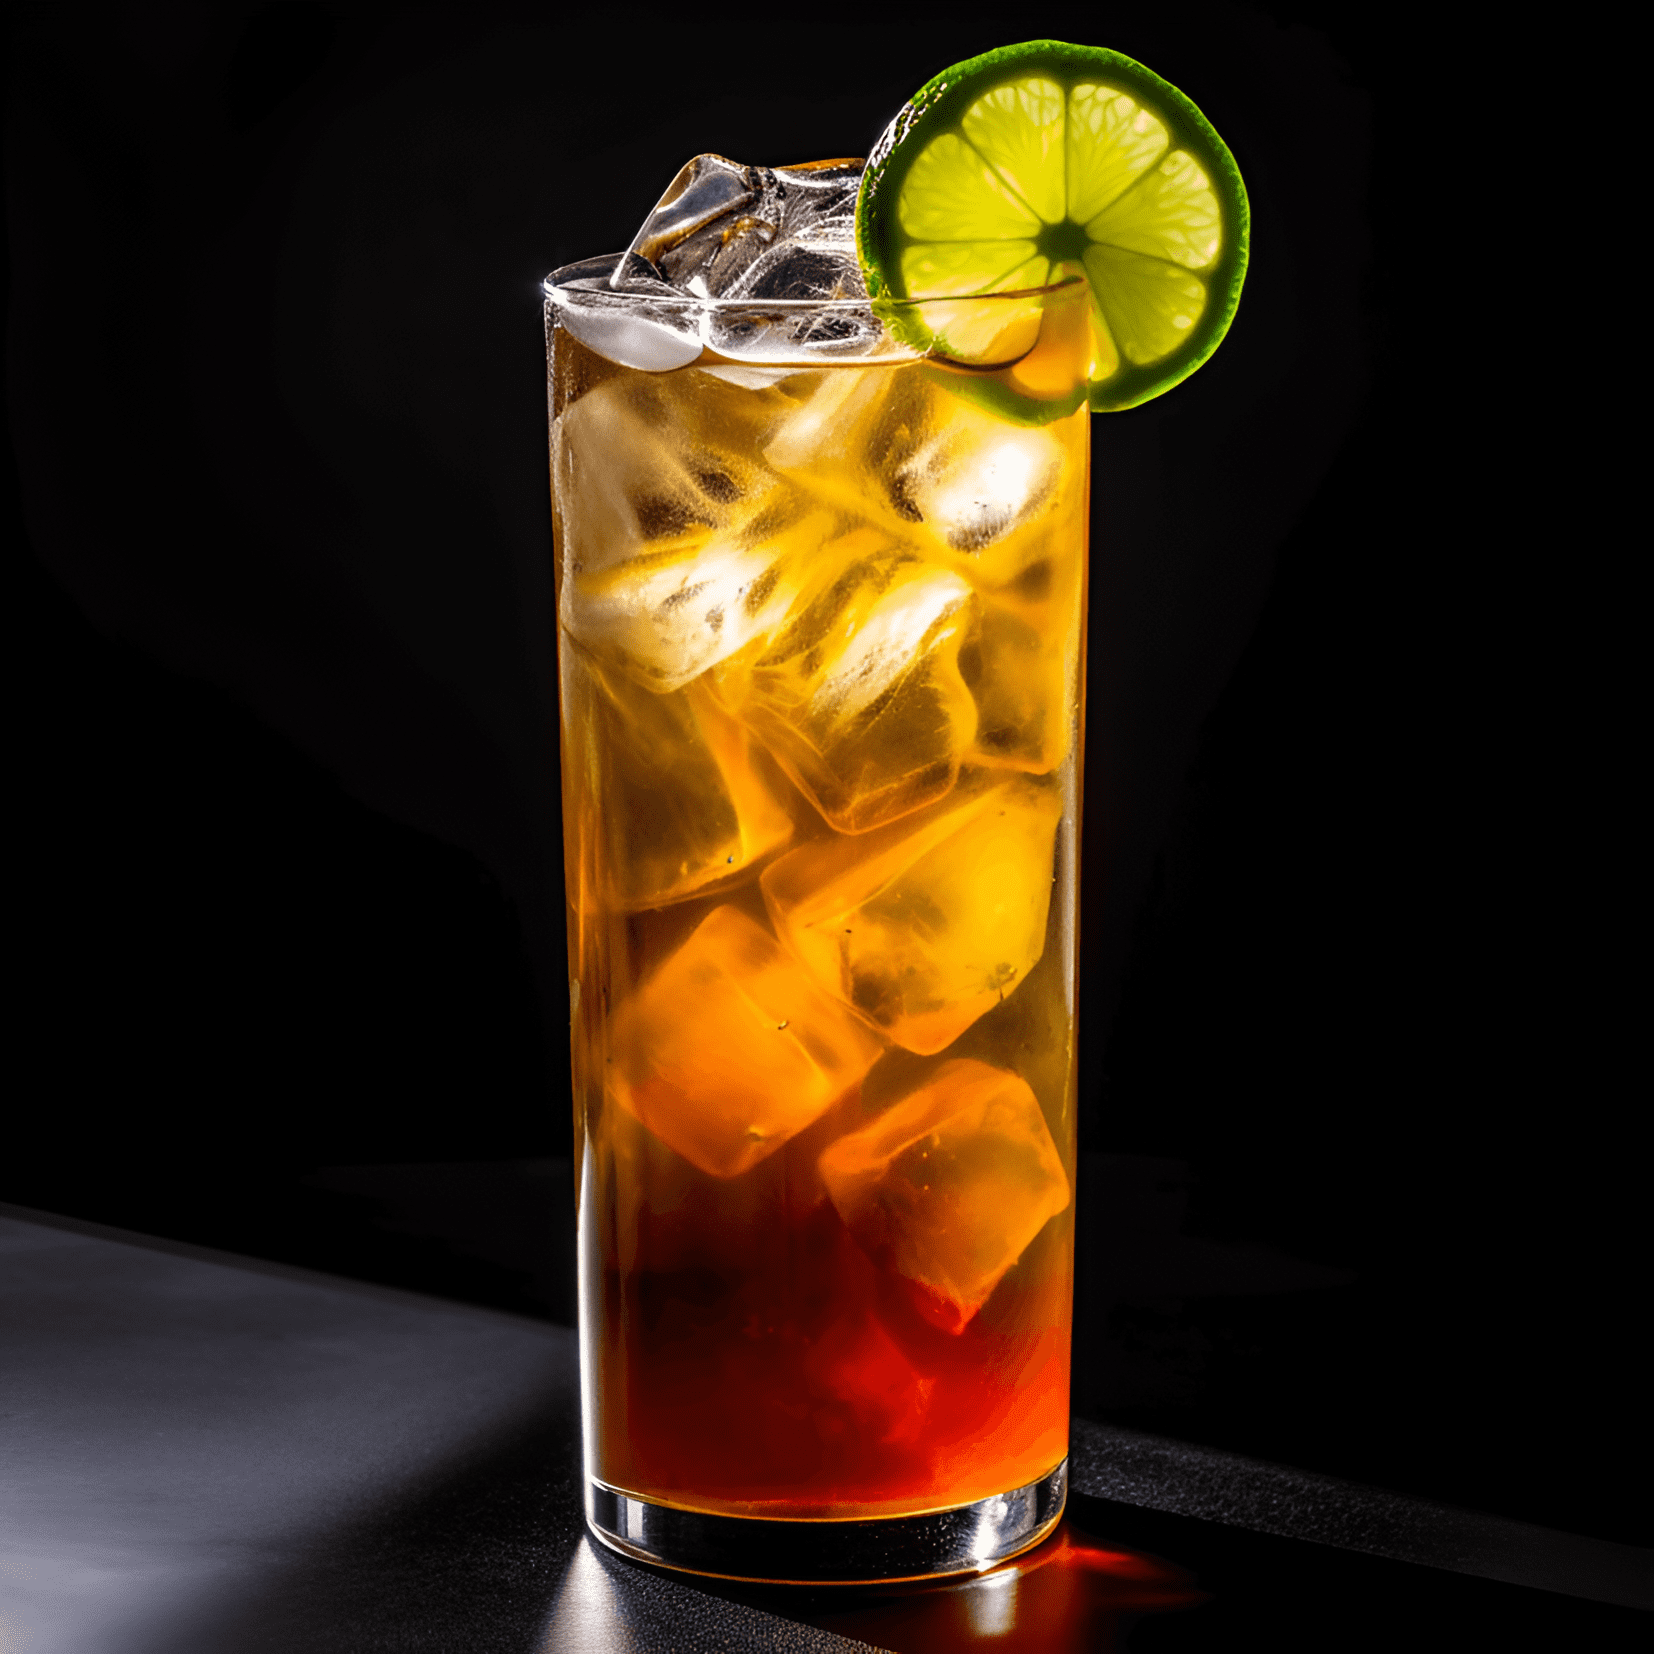 The Army Ranger cocktail is a powerful blend of flavors, with a strong, bold taste that is both refreshing and invigorating. The combination of whiskey, lime juice, and ginger beer creates a spicy, tangy, and slightly sweet flavor profile, while the addition of mint leaves adds a cool, refreshing finish.